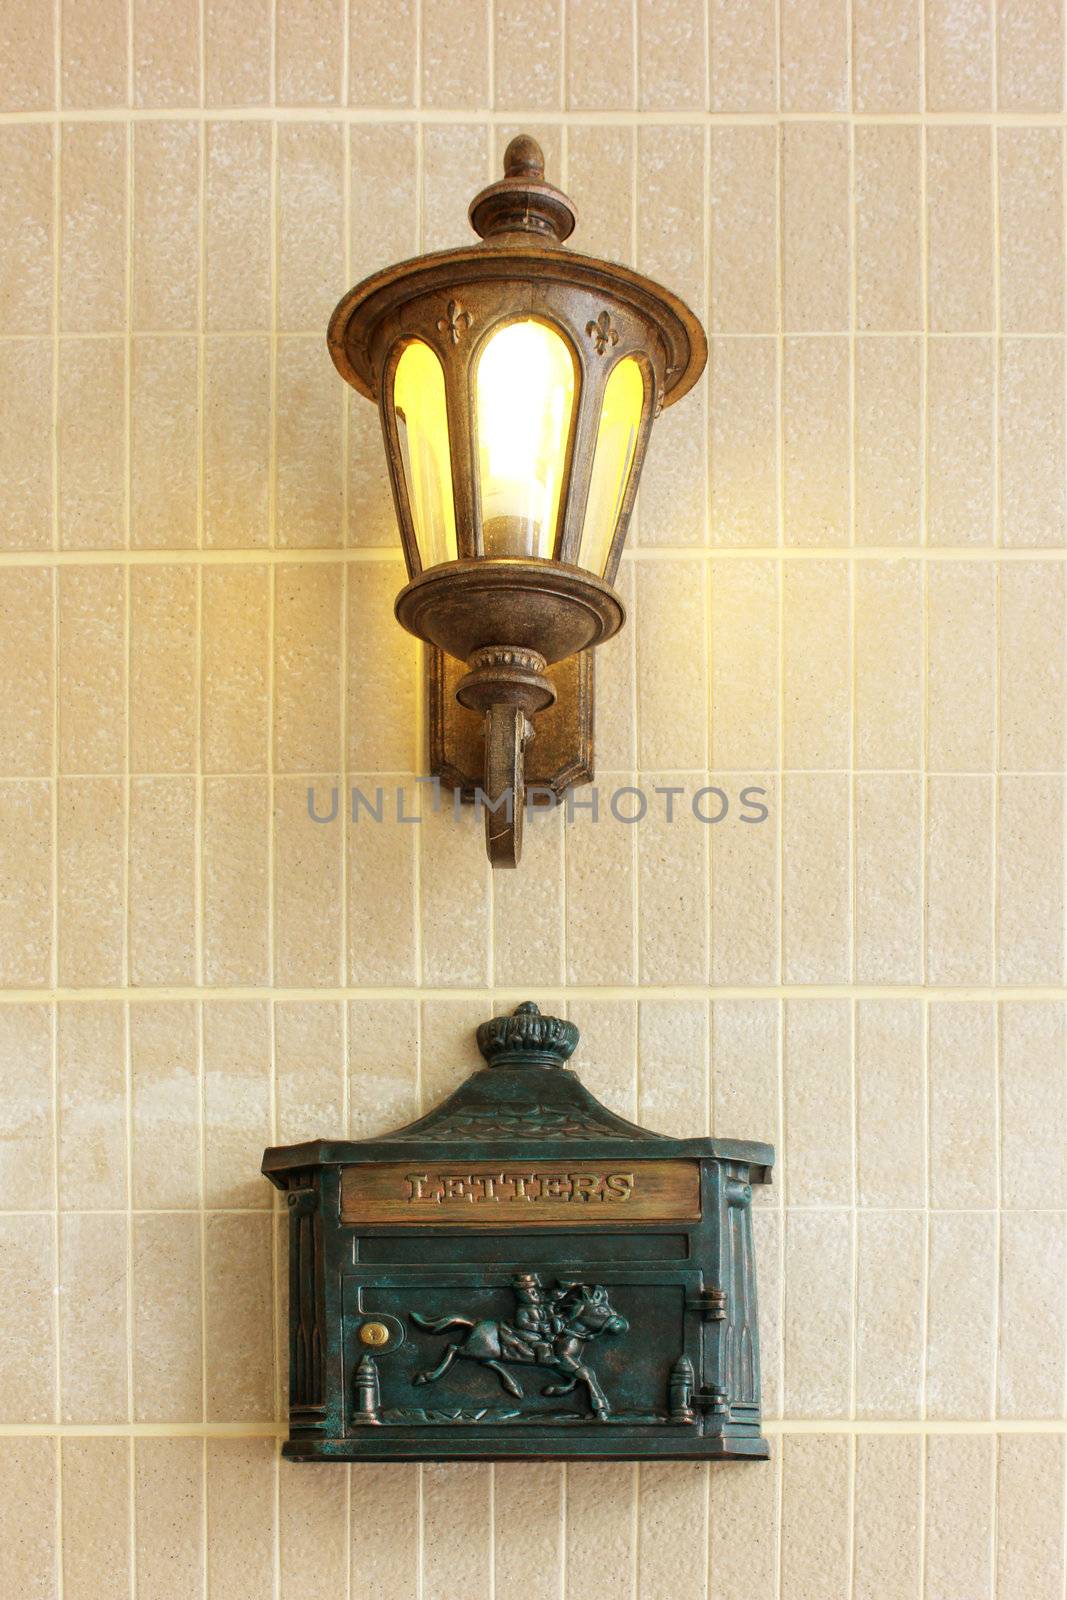 Vintage street lamp with letter box on wall by nuchylee